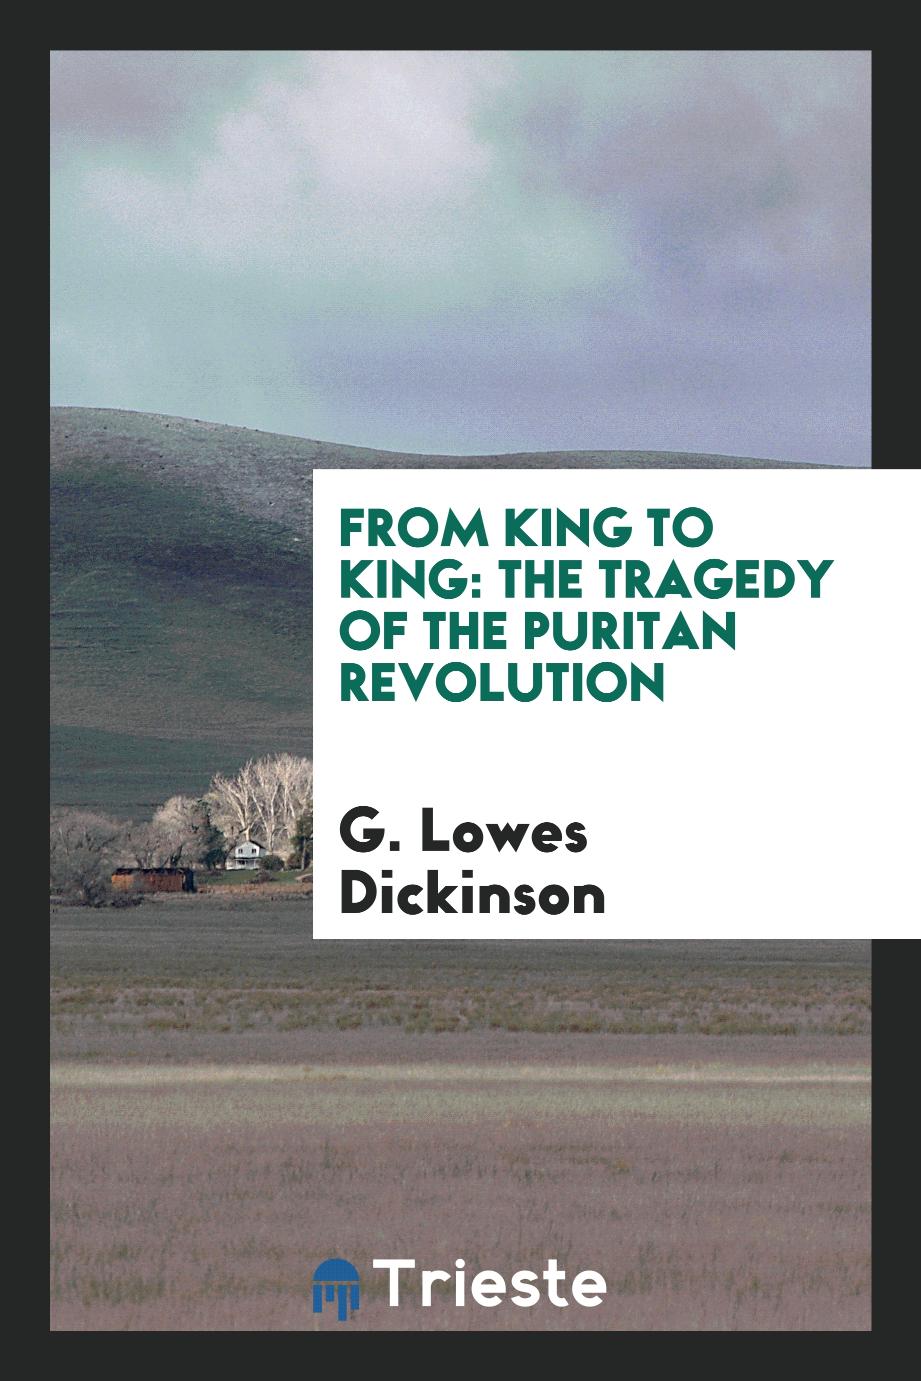 From King to King: The Tragedy of the Puritan Revolution